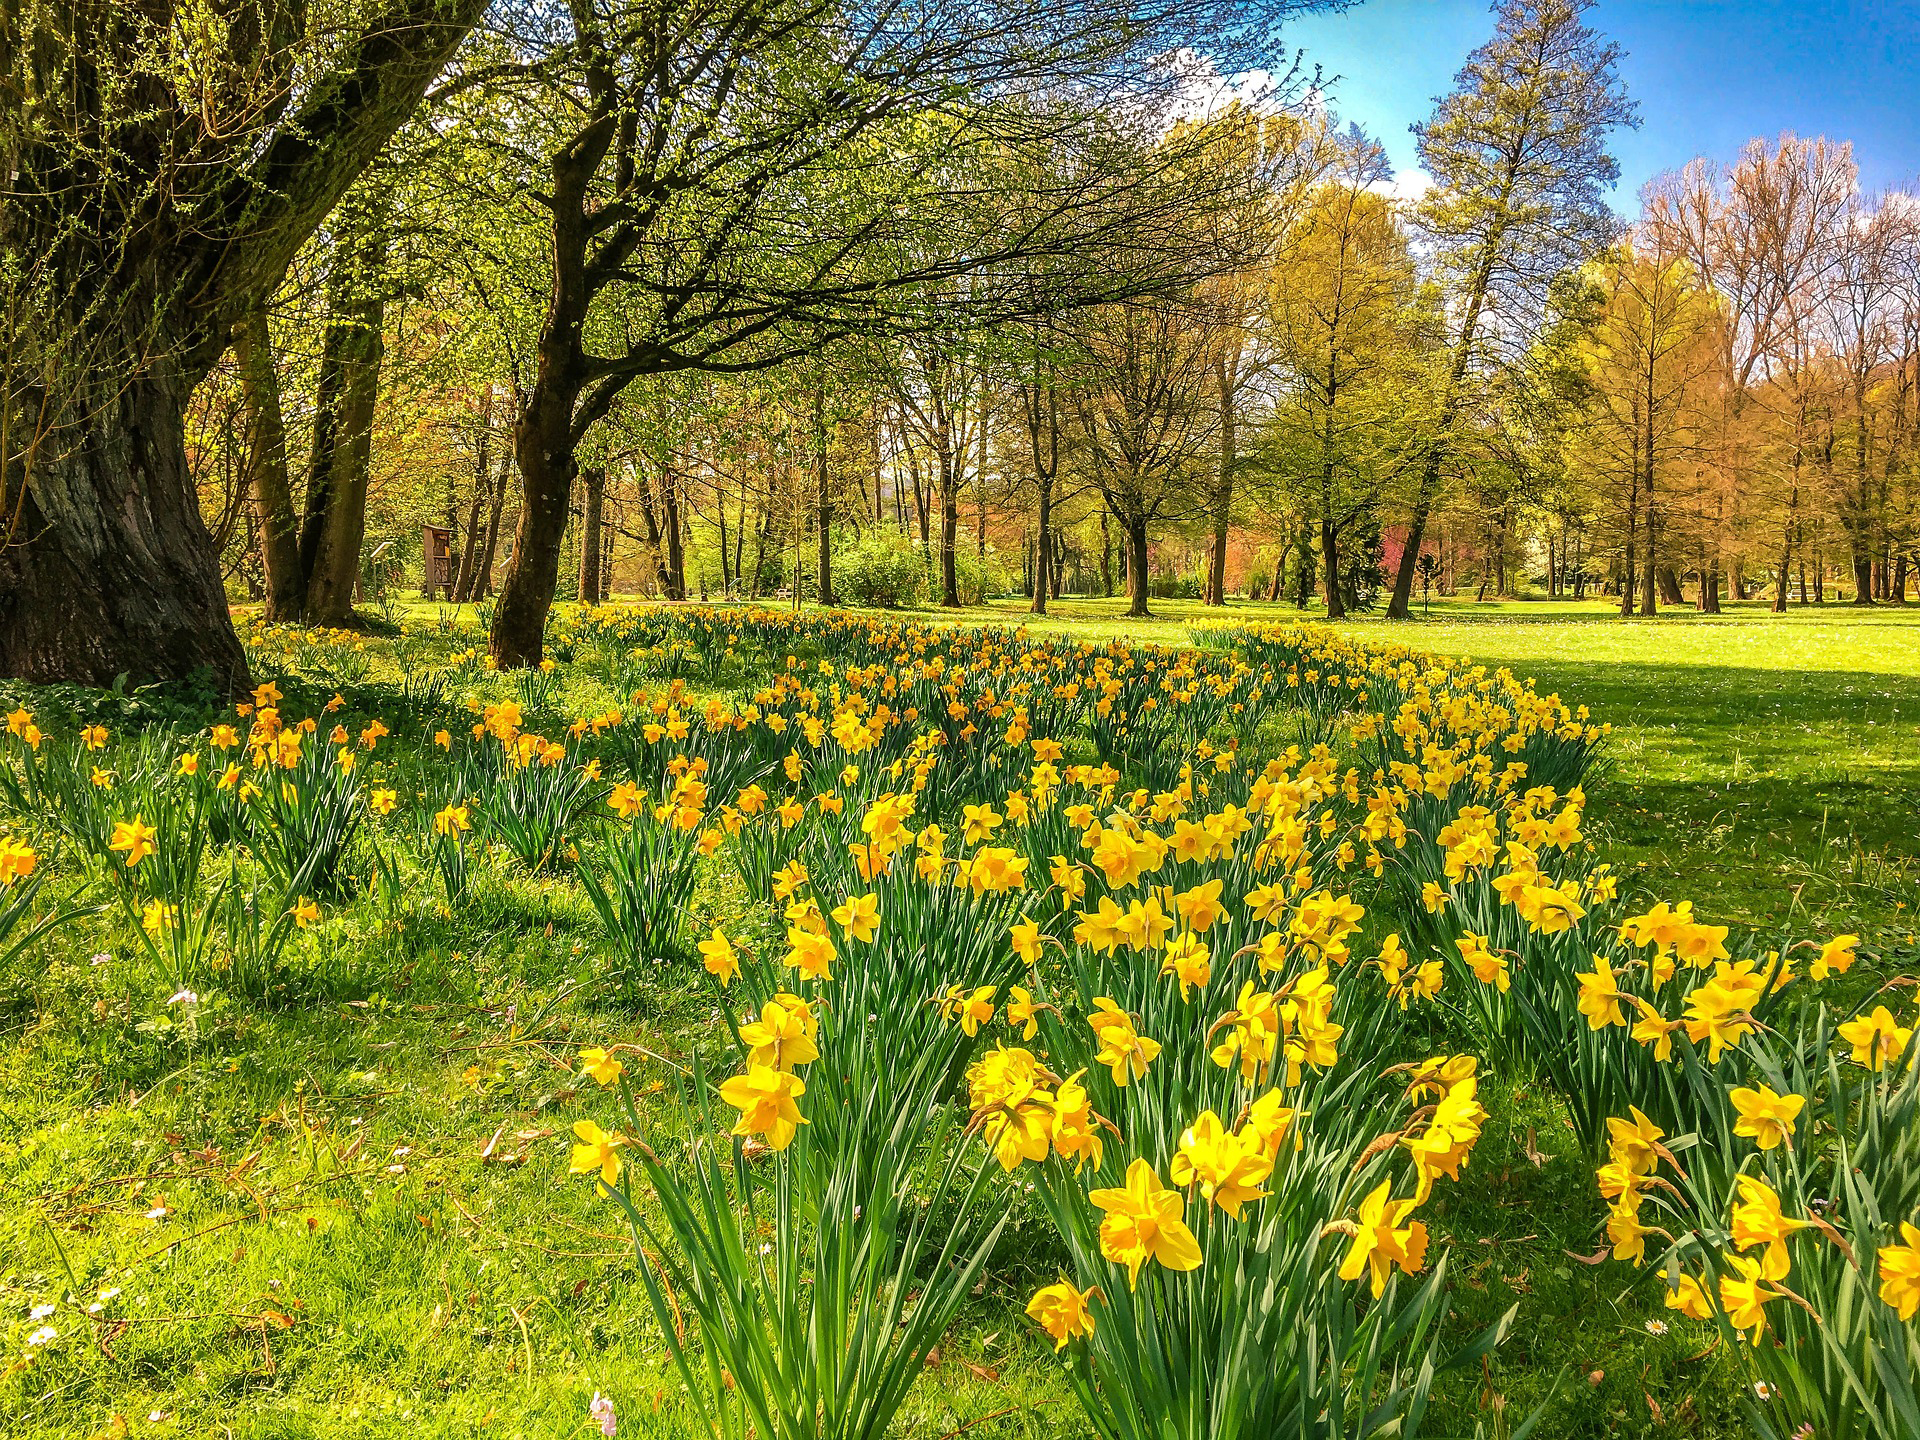 image of daffodils in a park